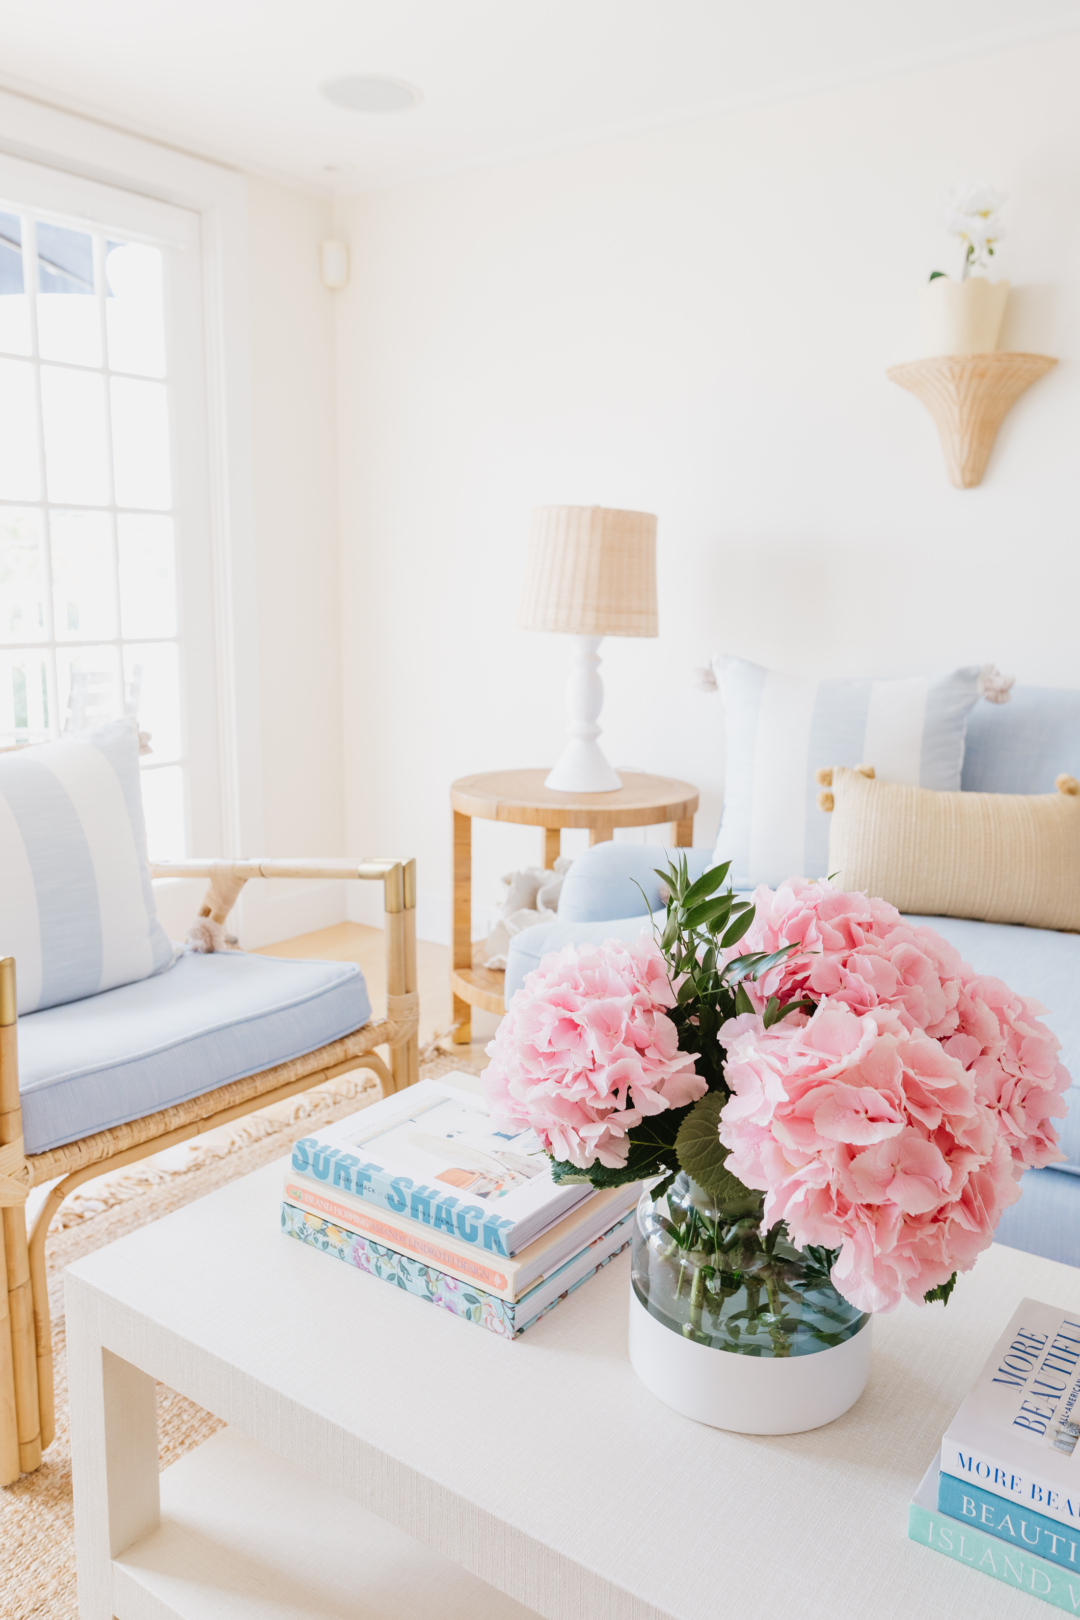 Travel: Designing the Endeavor Cottage with Serena & Lily at Inspirato's Harborview Nantucket